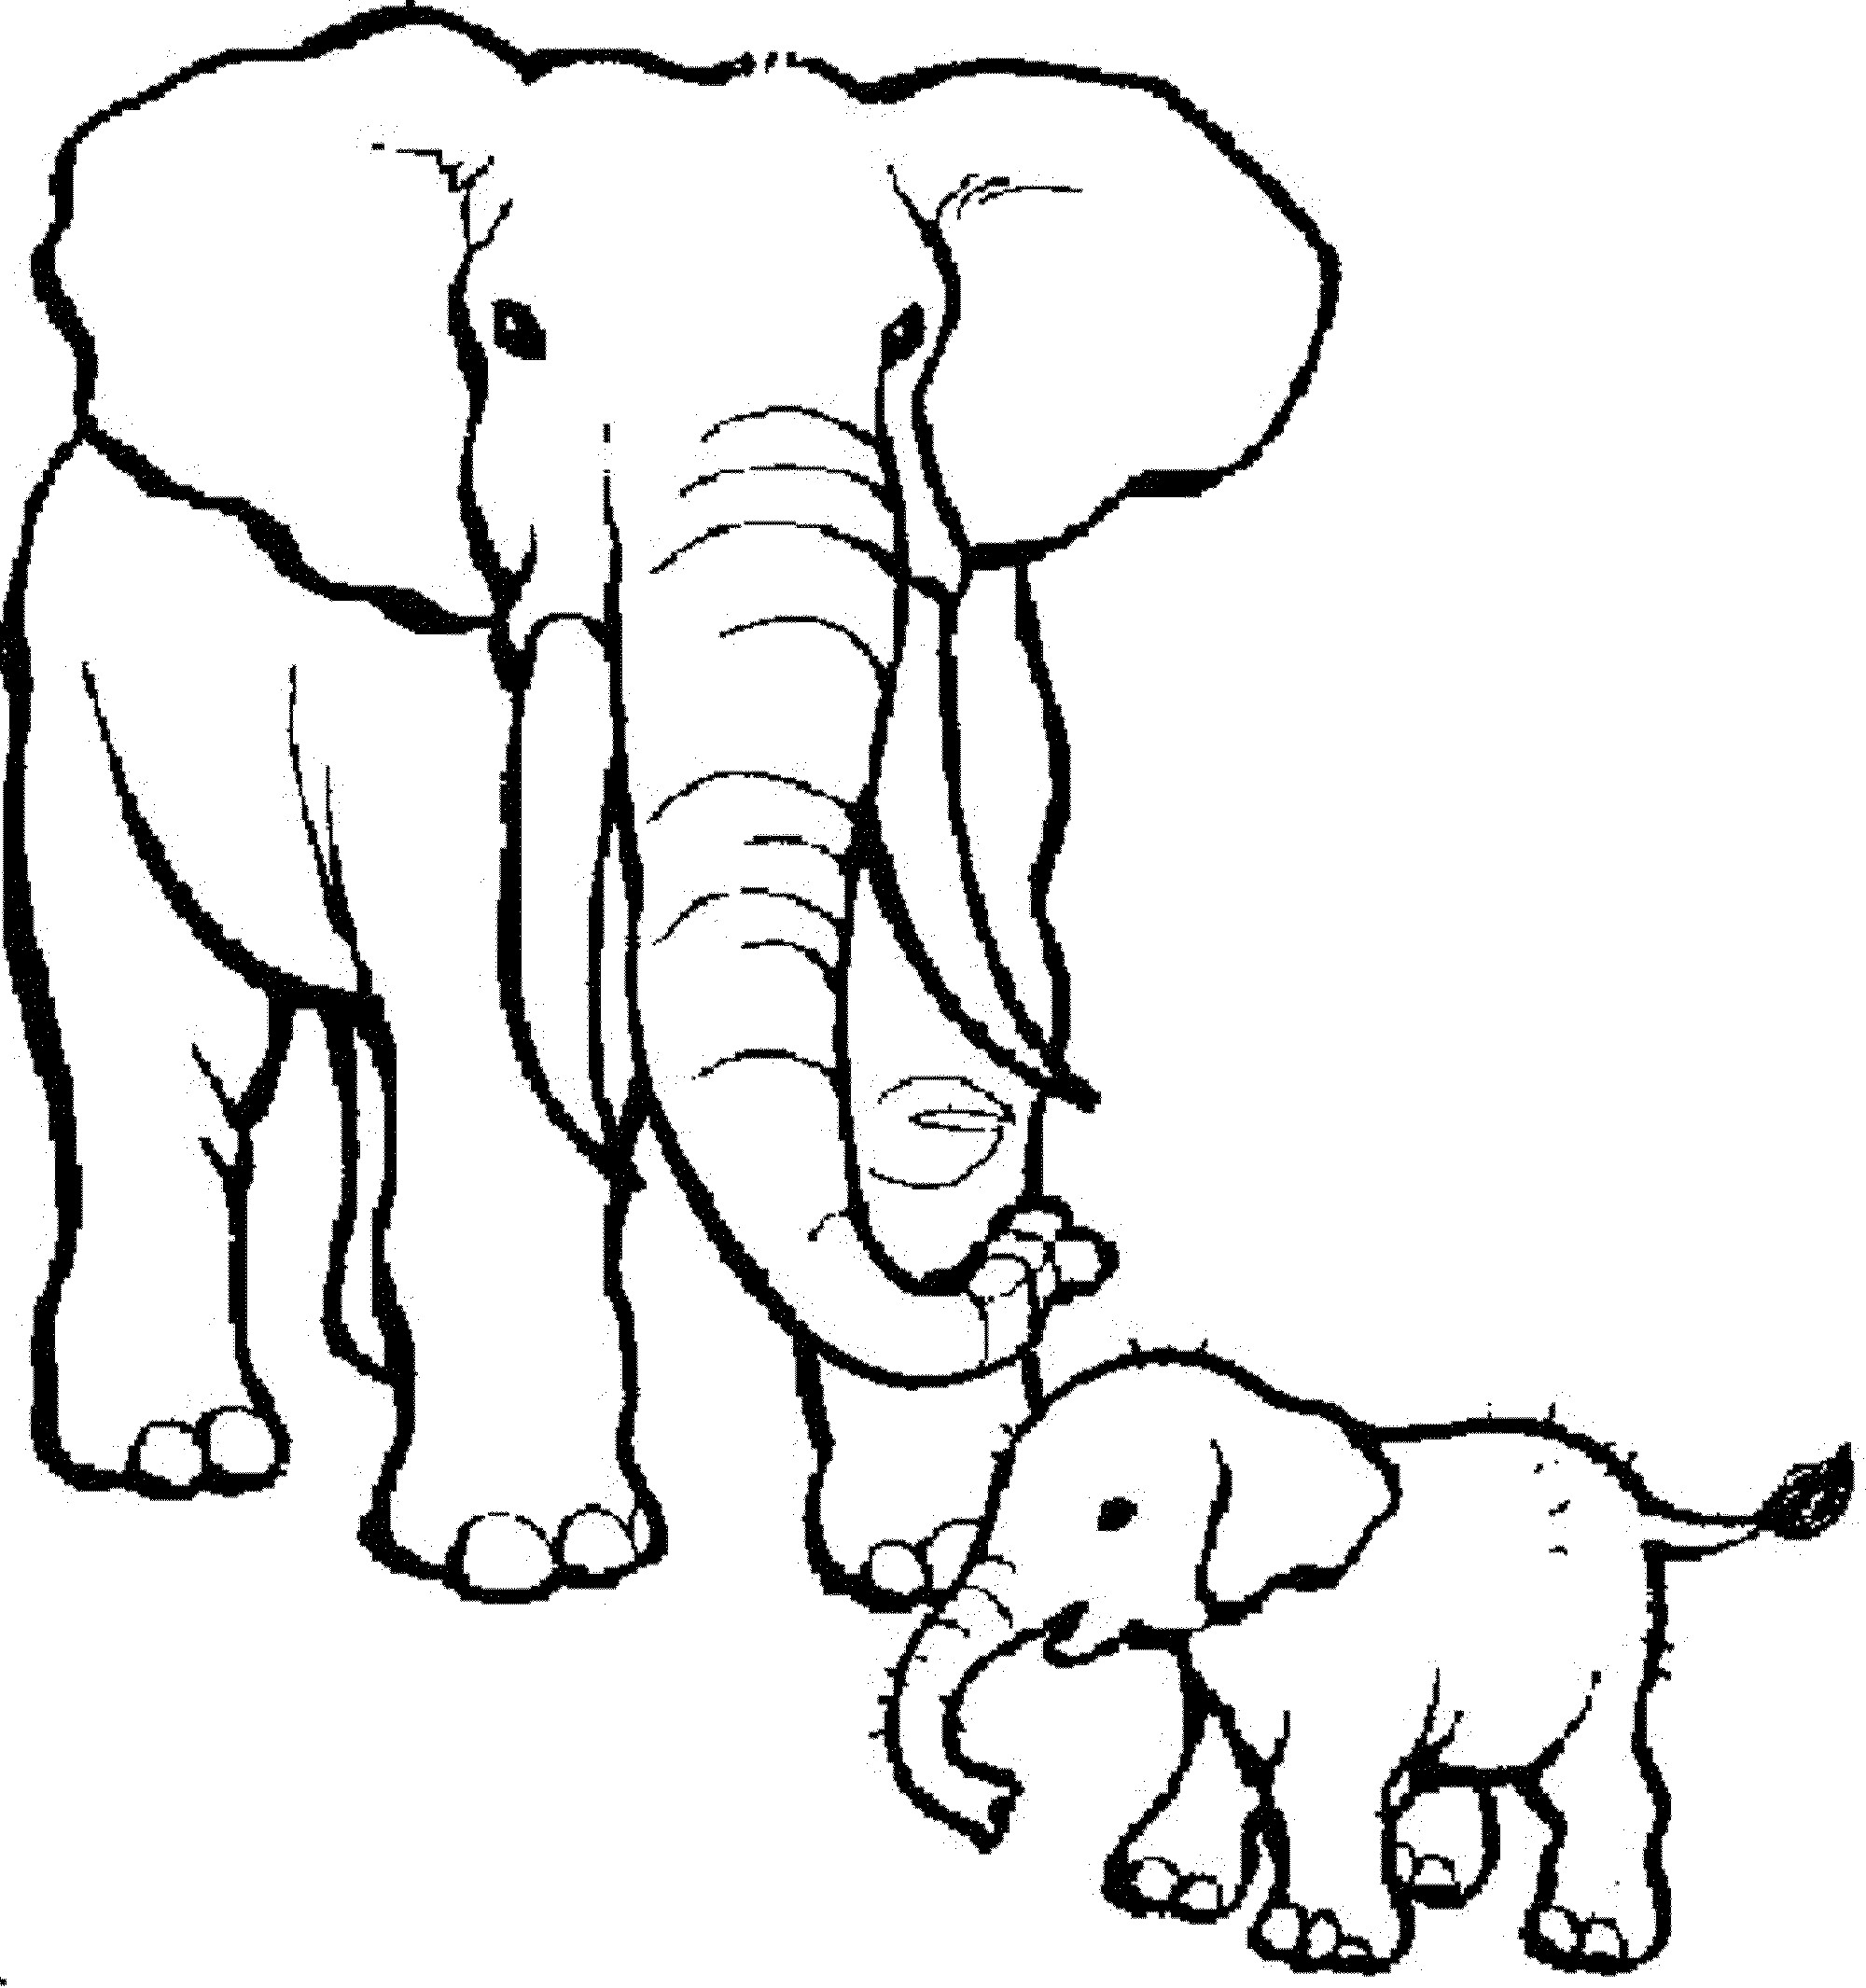 Realistic Elephant Coloring Pages at GetDrawings | Free ...